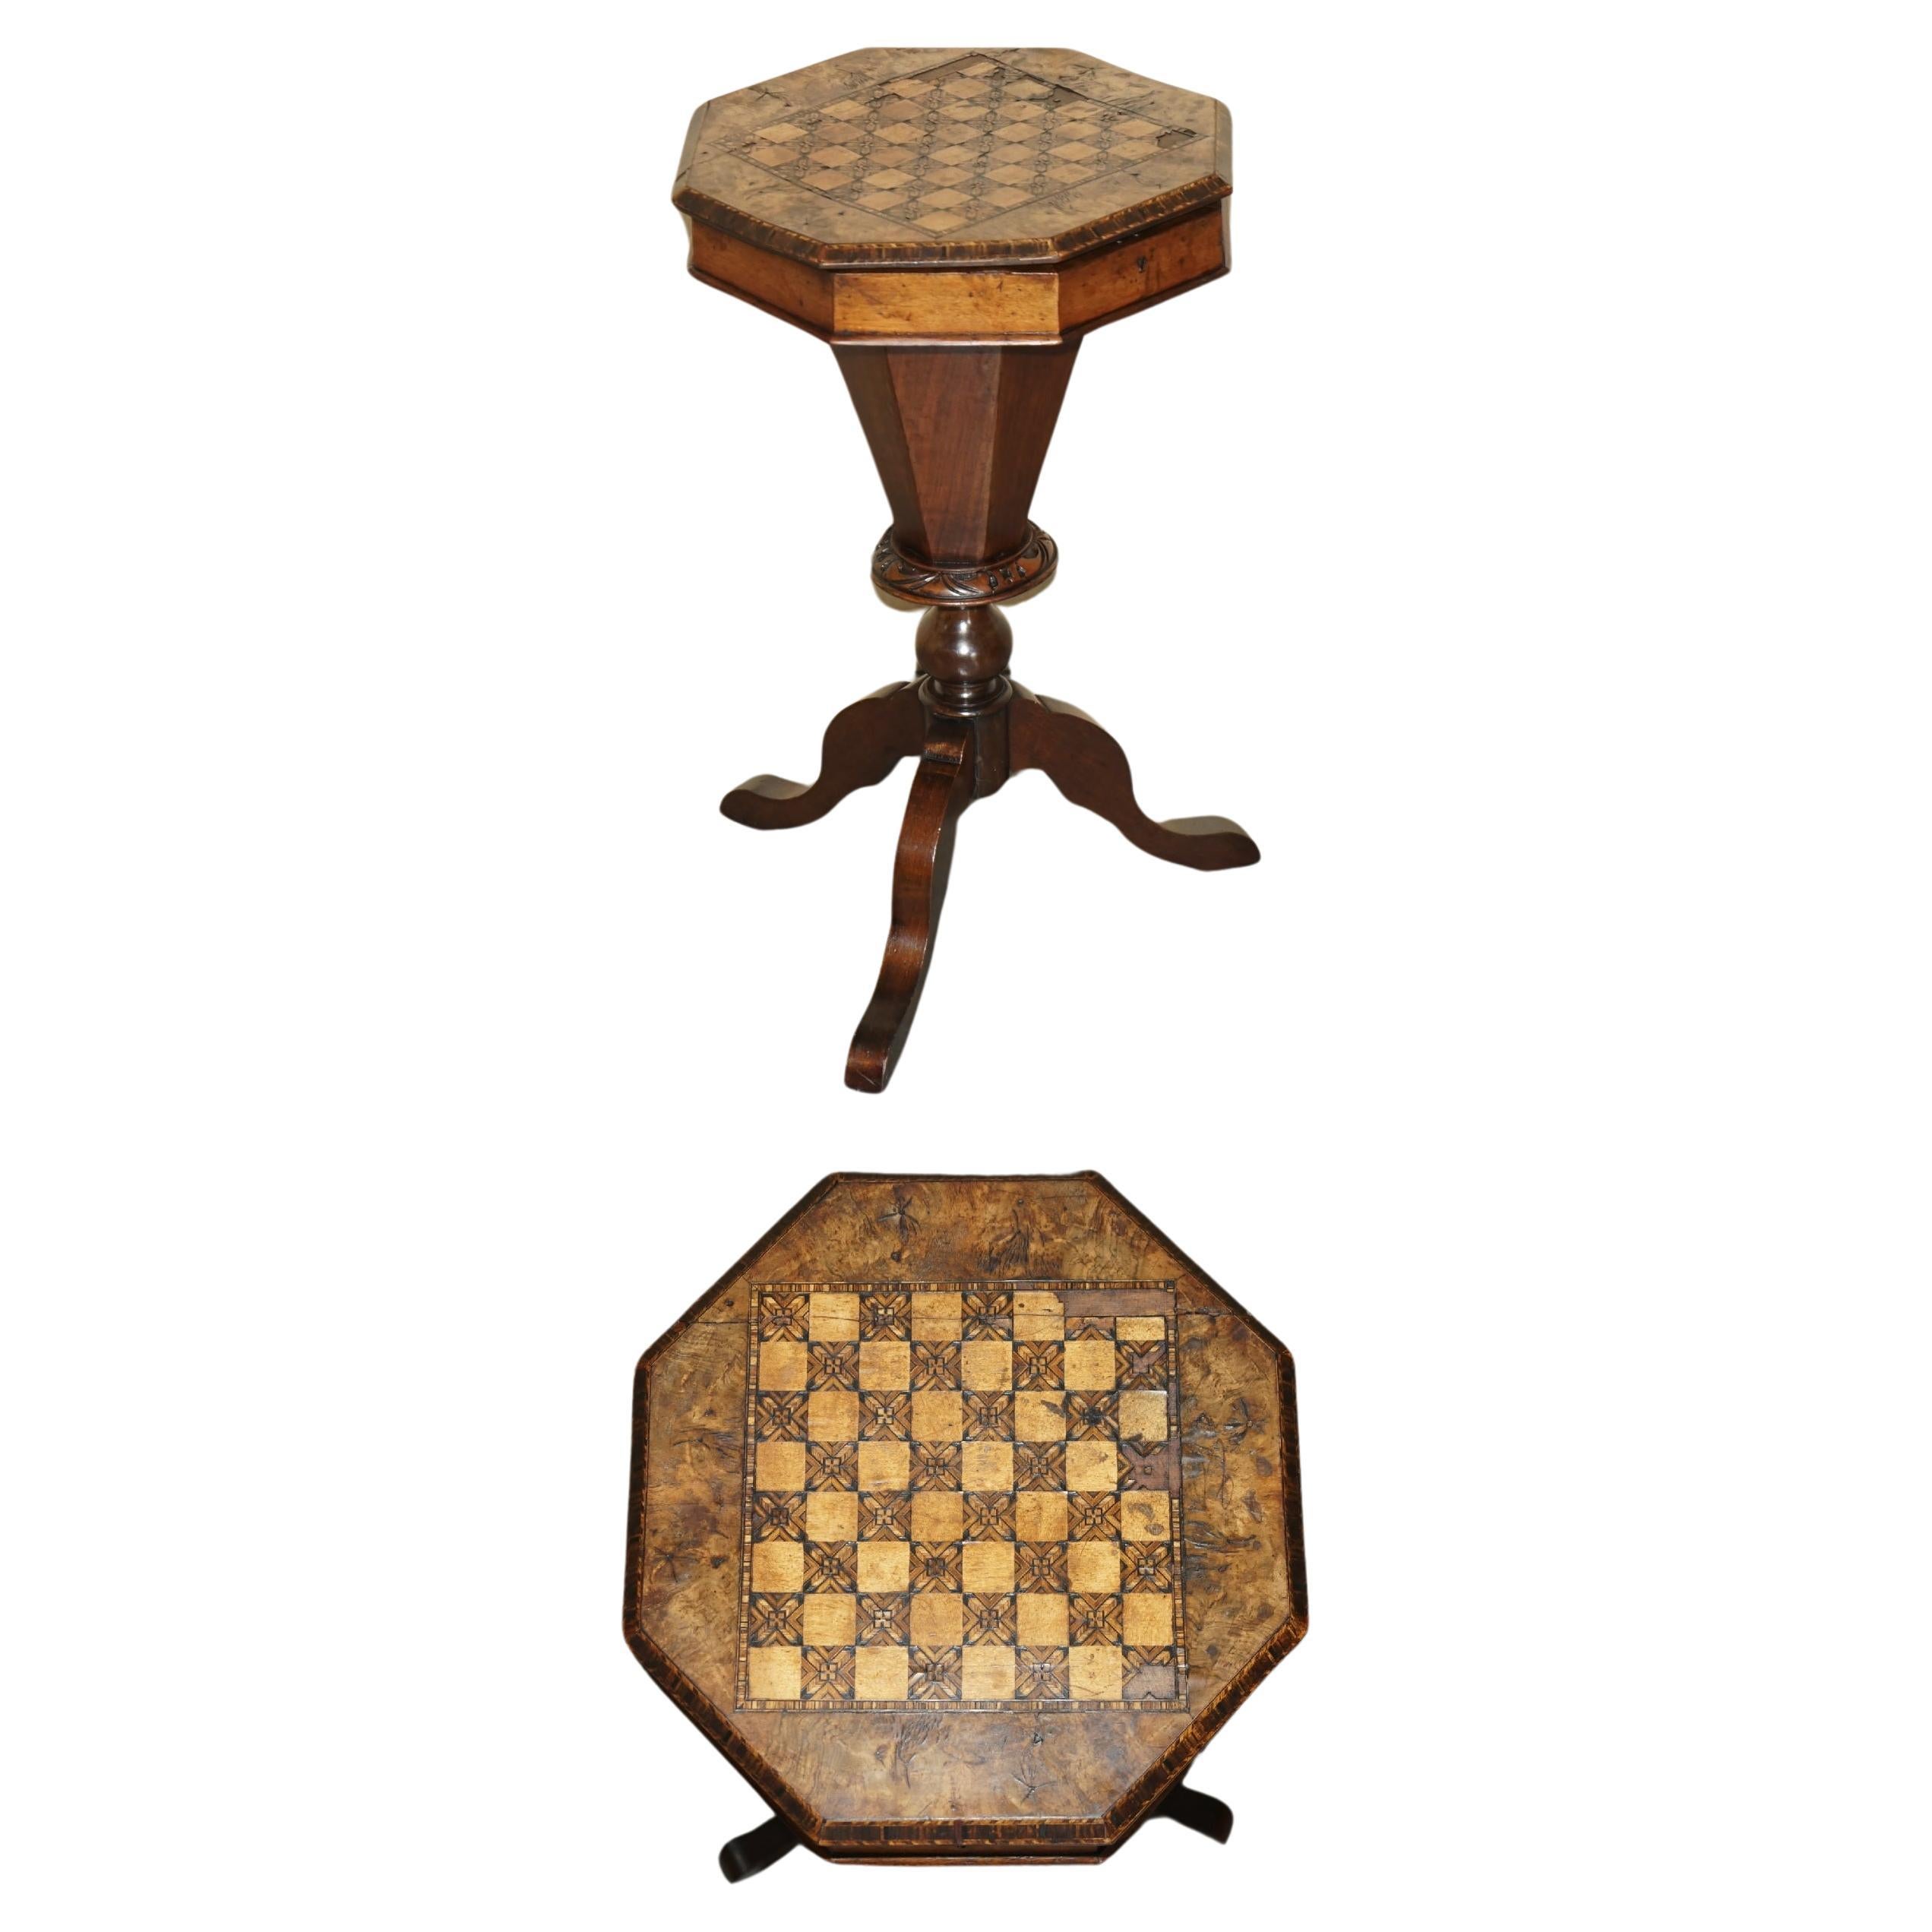 DISTRESsed ANTIQUE BURR WALNUT & HARDWOOD SEWiNG WORK TABLE CHESS BOARD TOP im Angebot